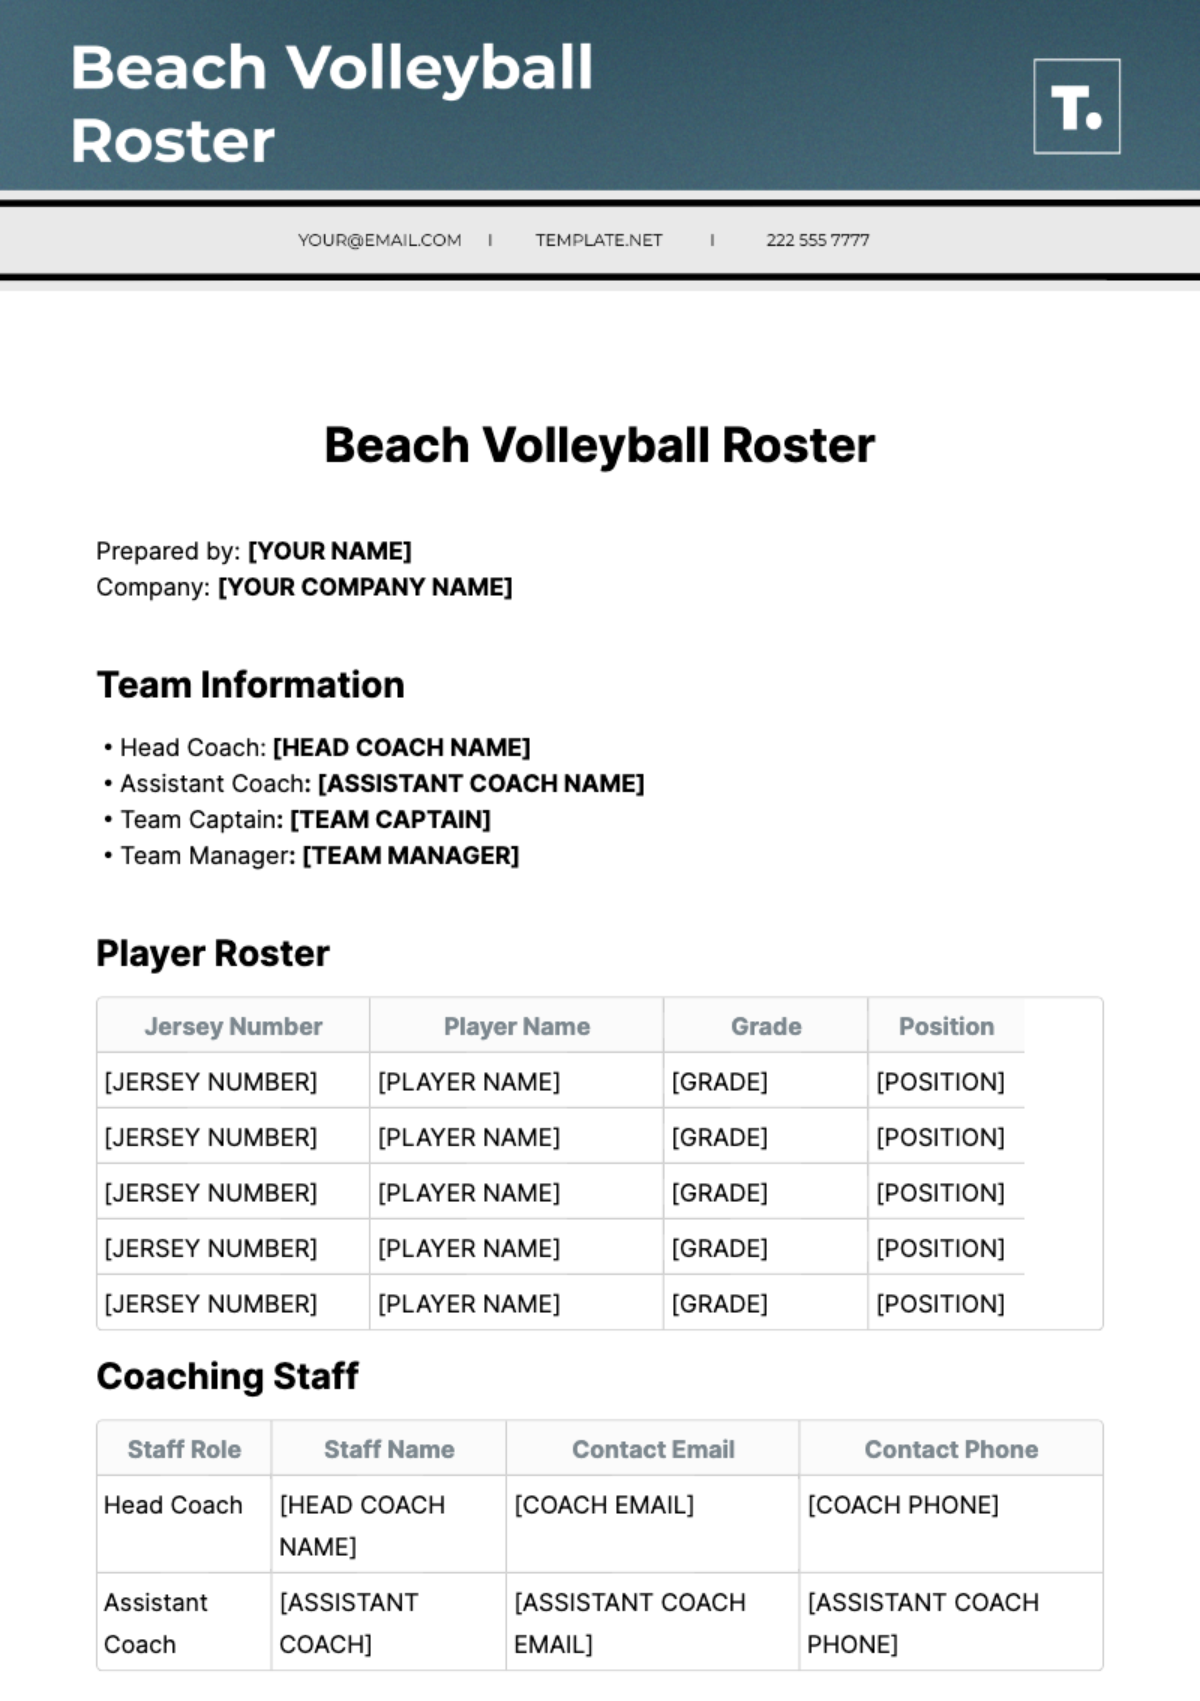 Beach Volleyball Roster Template